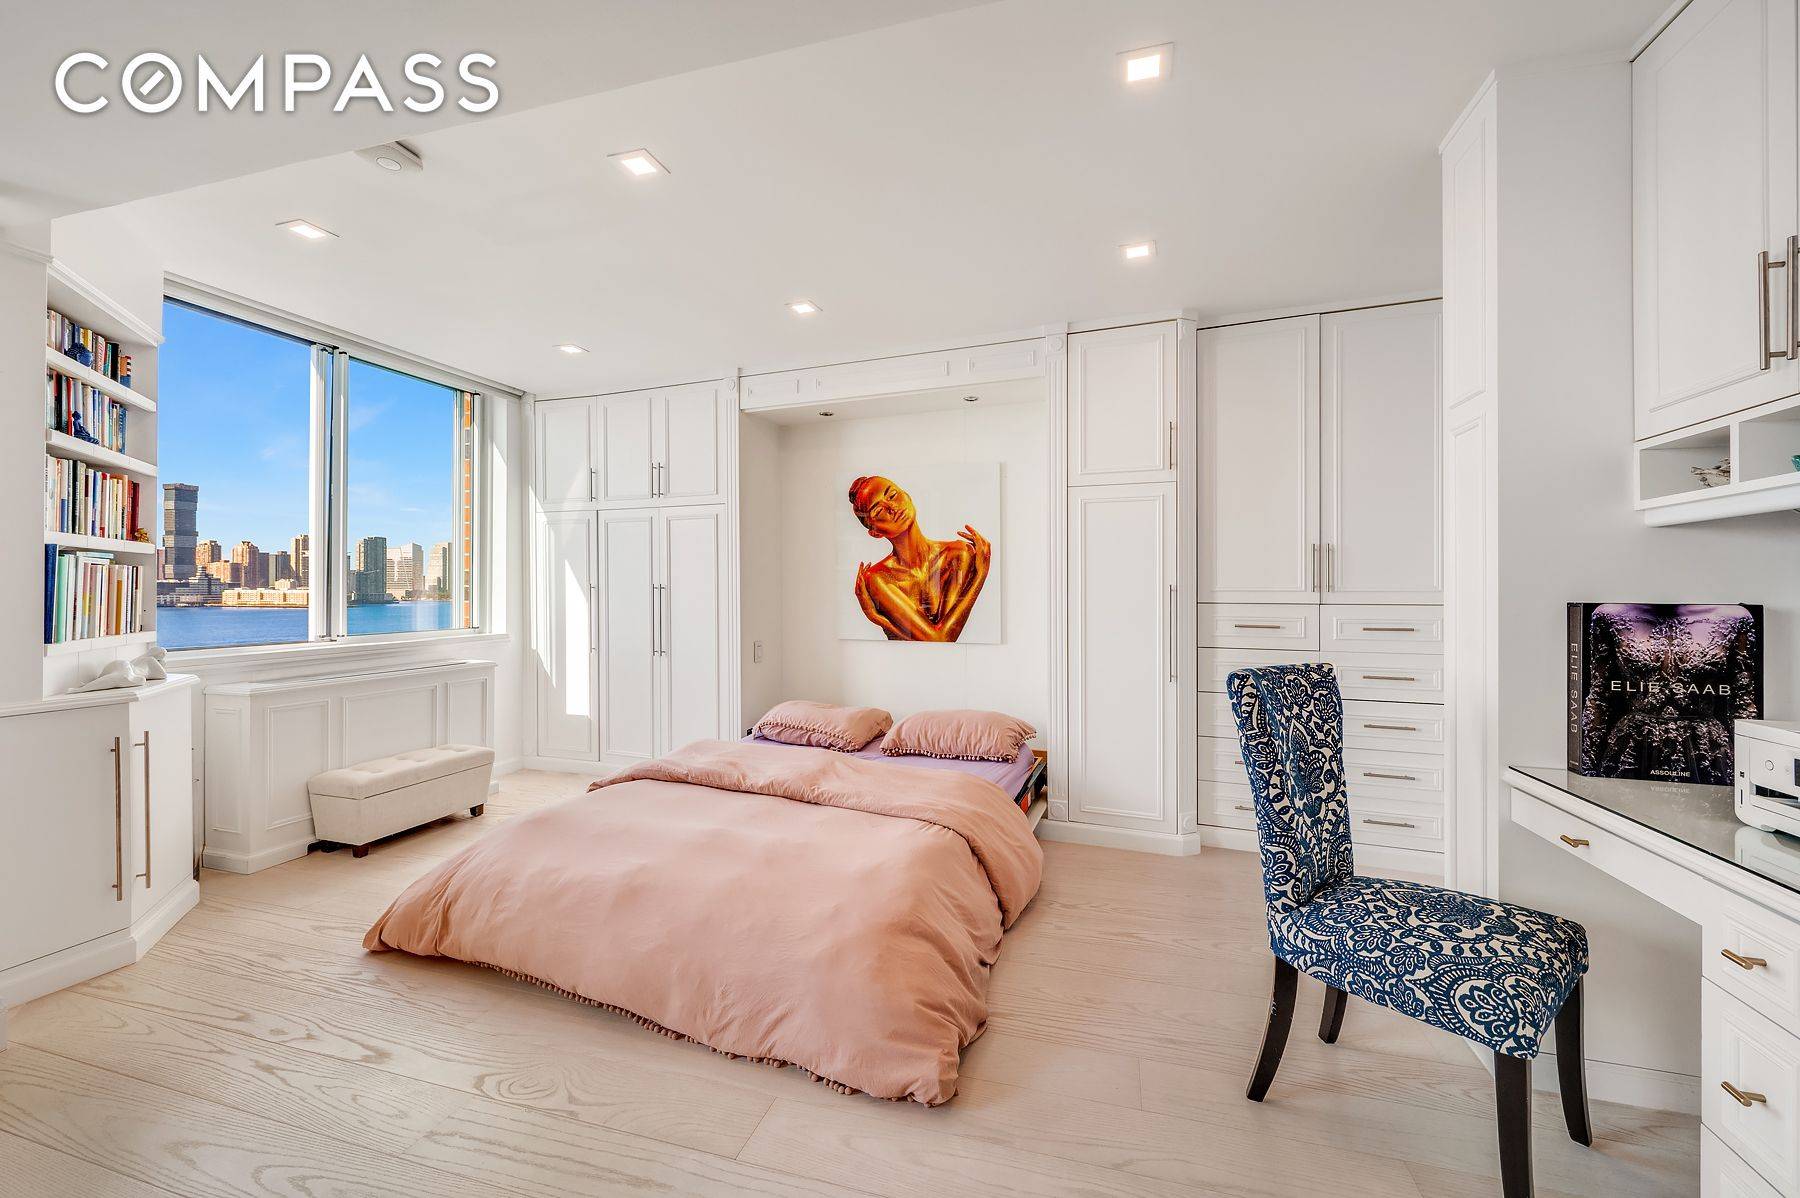 Welcome to this meticulously renovated and sun flooded residence with mesmerizing views of the Hudson River and beyond for as far as the eye can see.